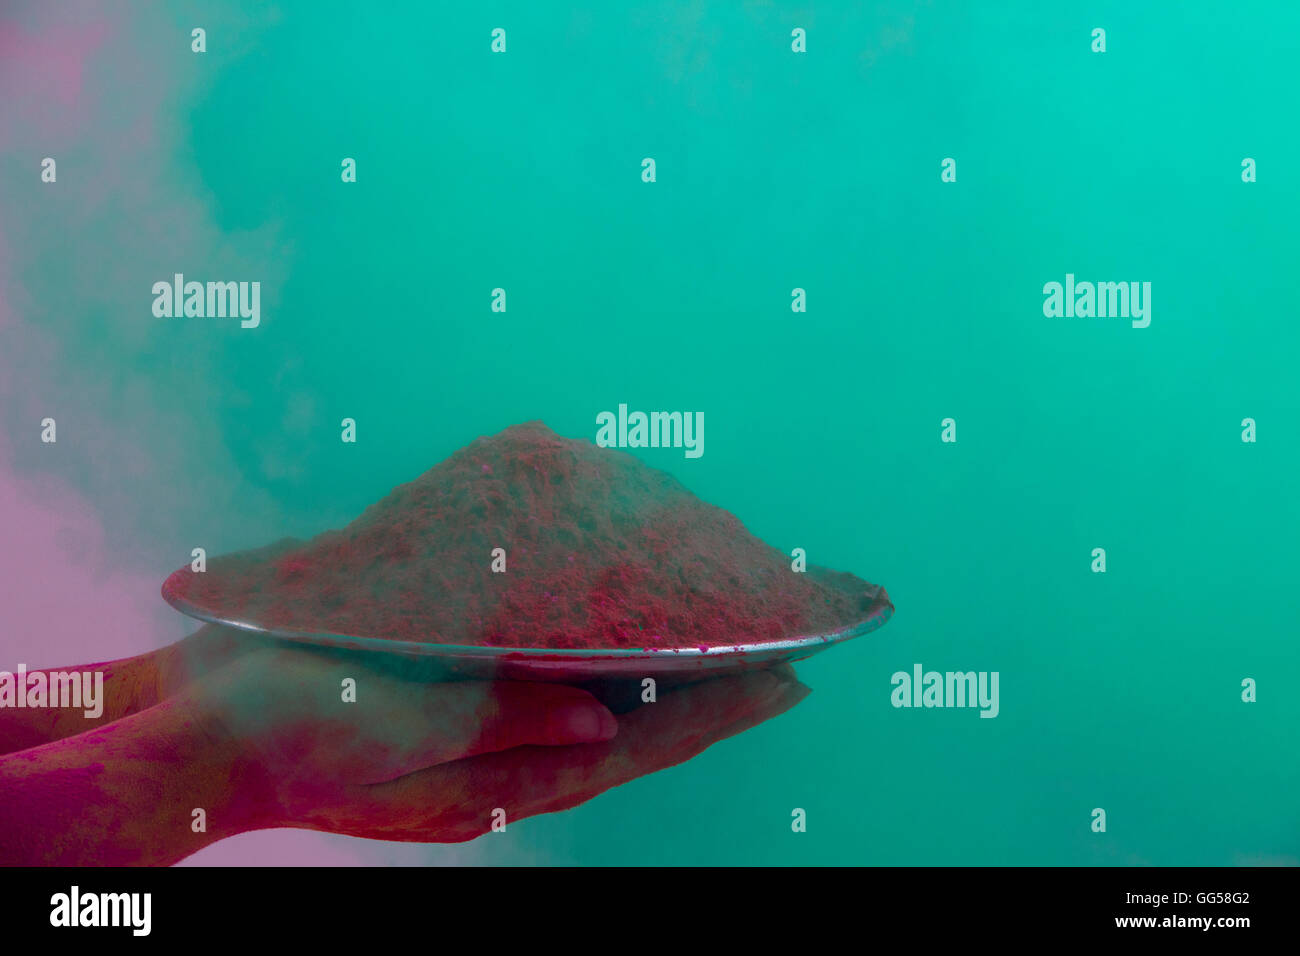 Close-up of hands holding plate with pink color powder during Holi festival Stock Photo